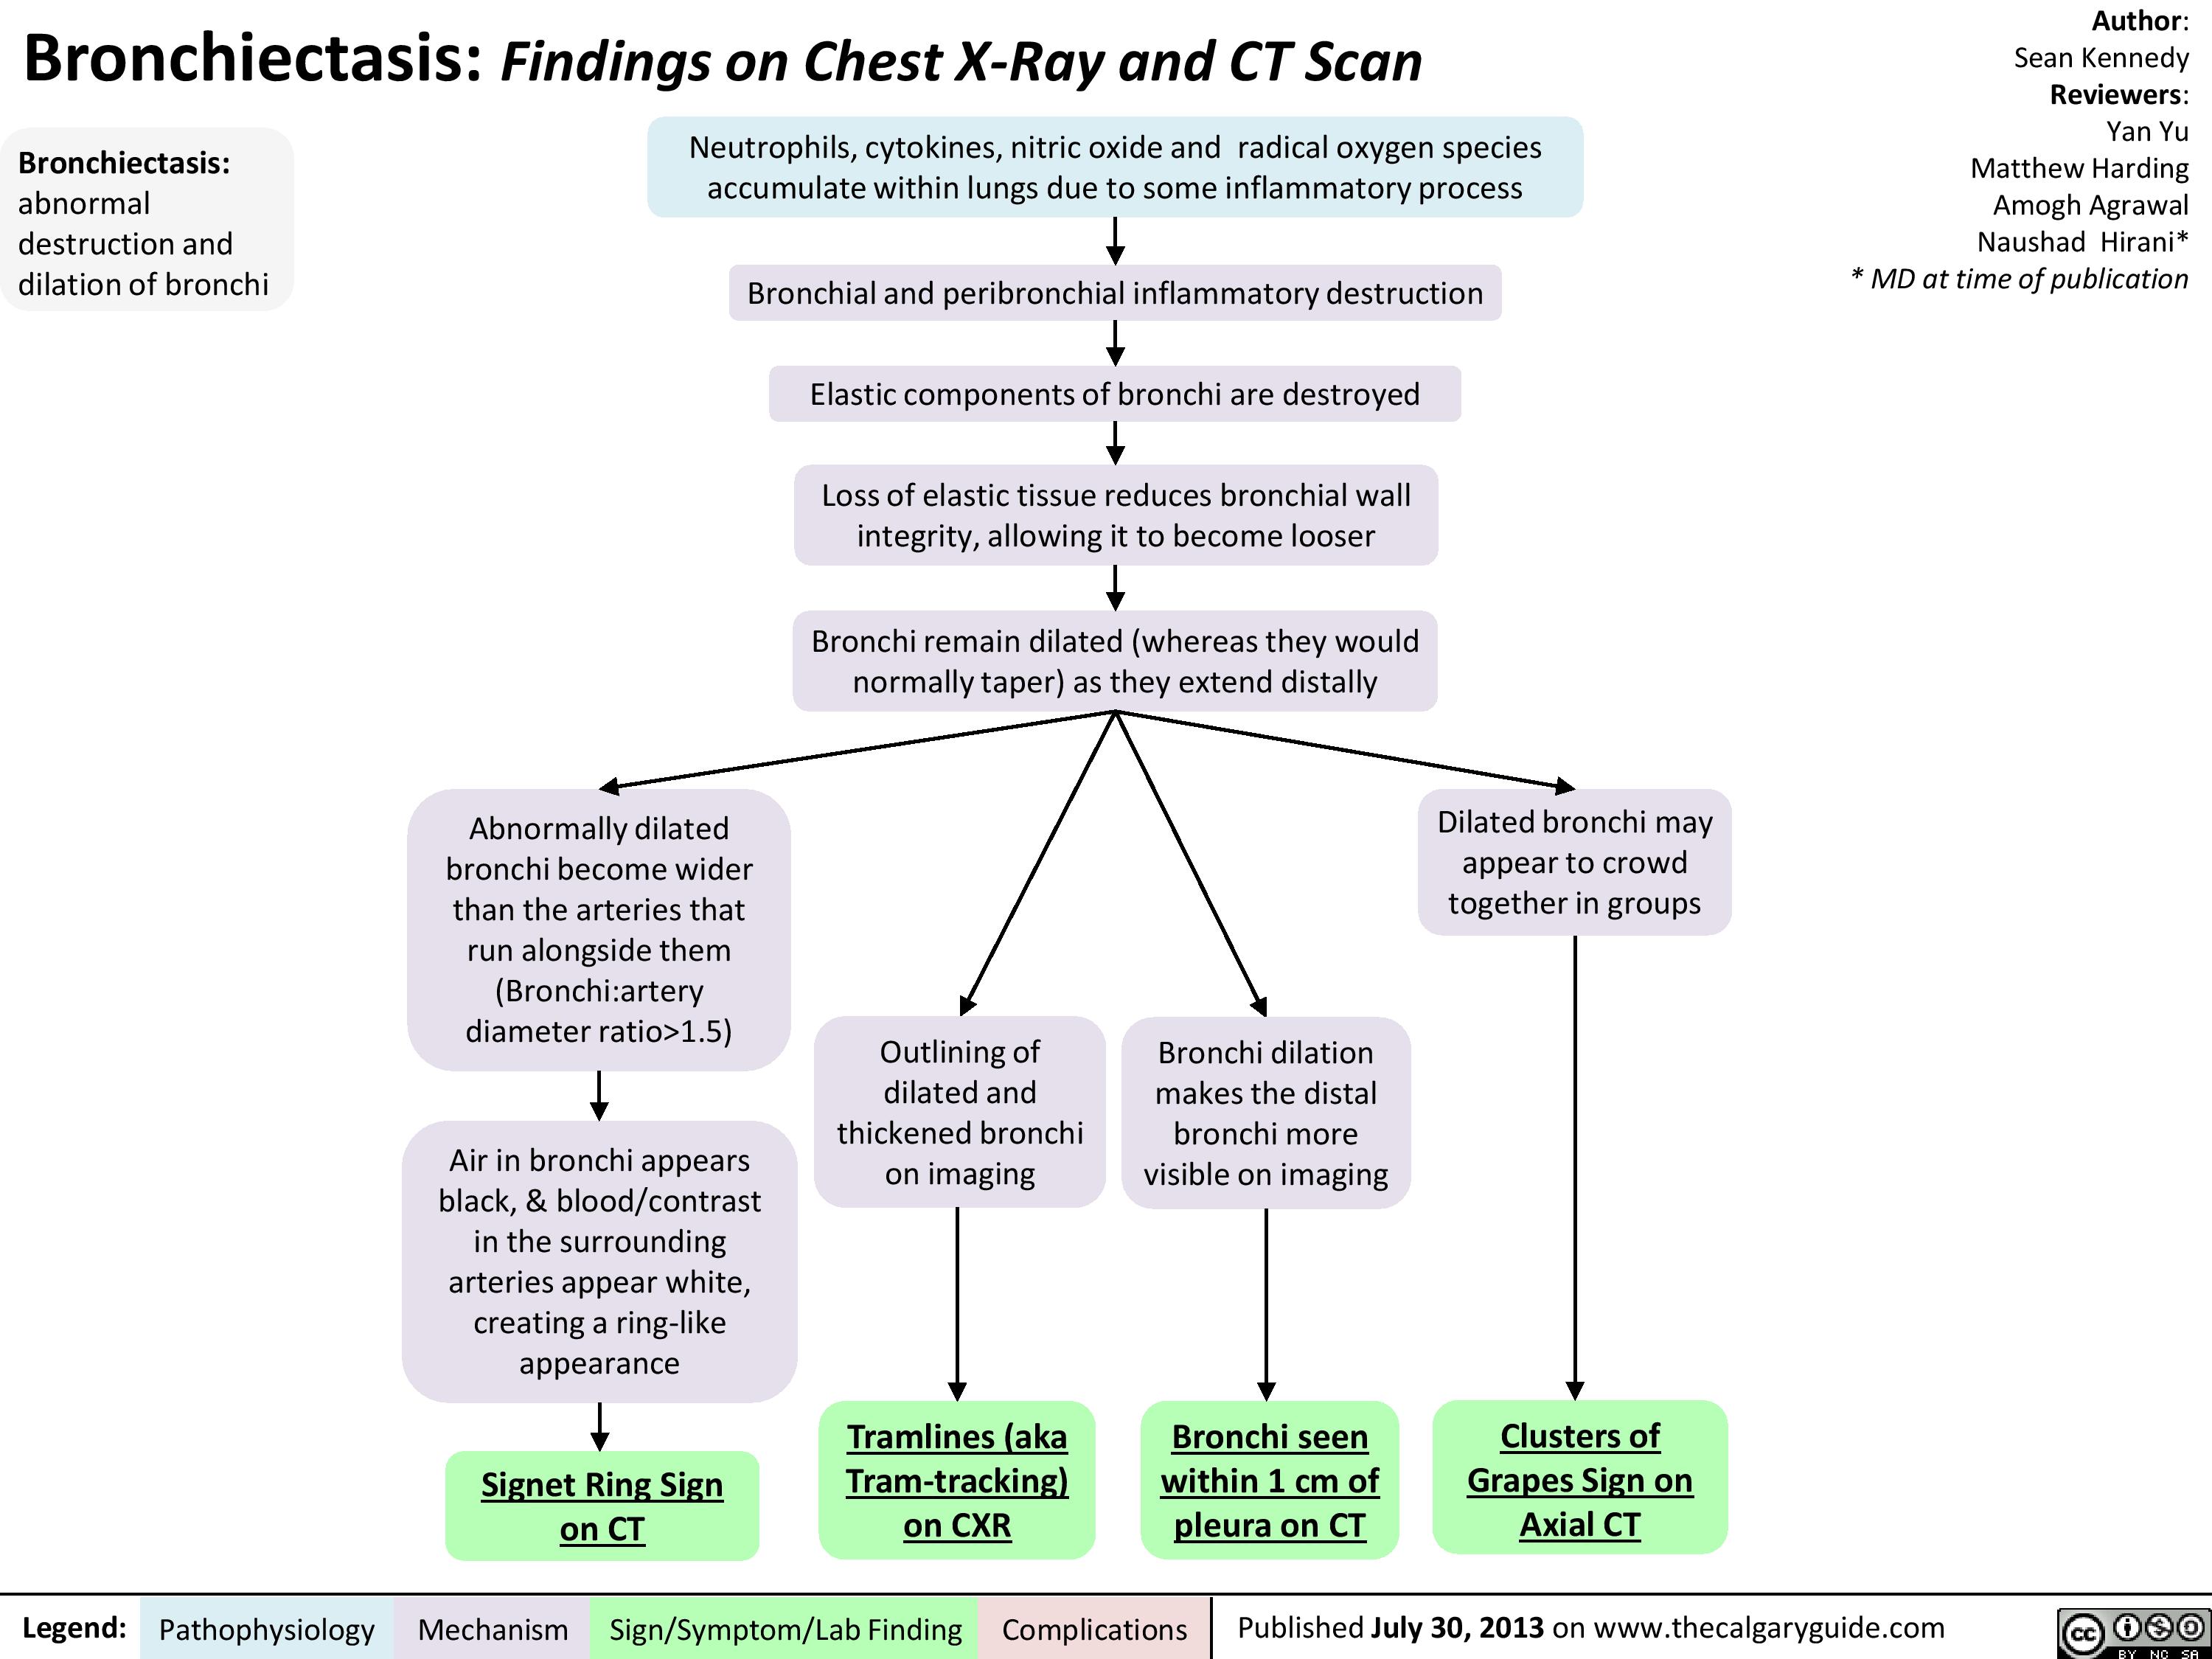 Bronchiectasis: Findings on Chest X-Ray and CT Scan